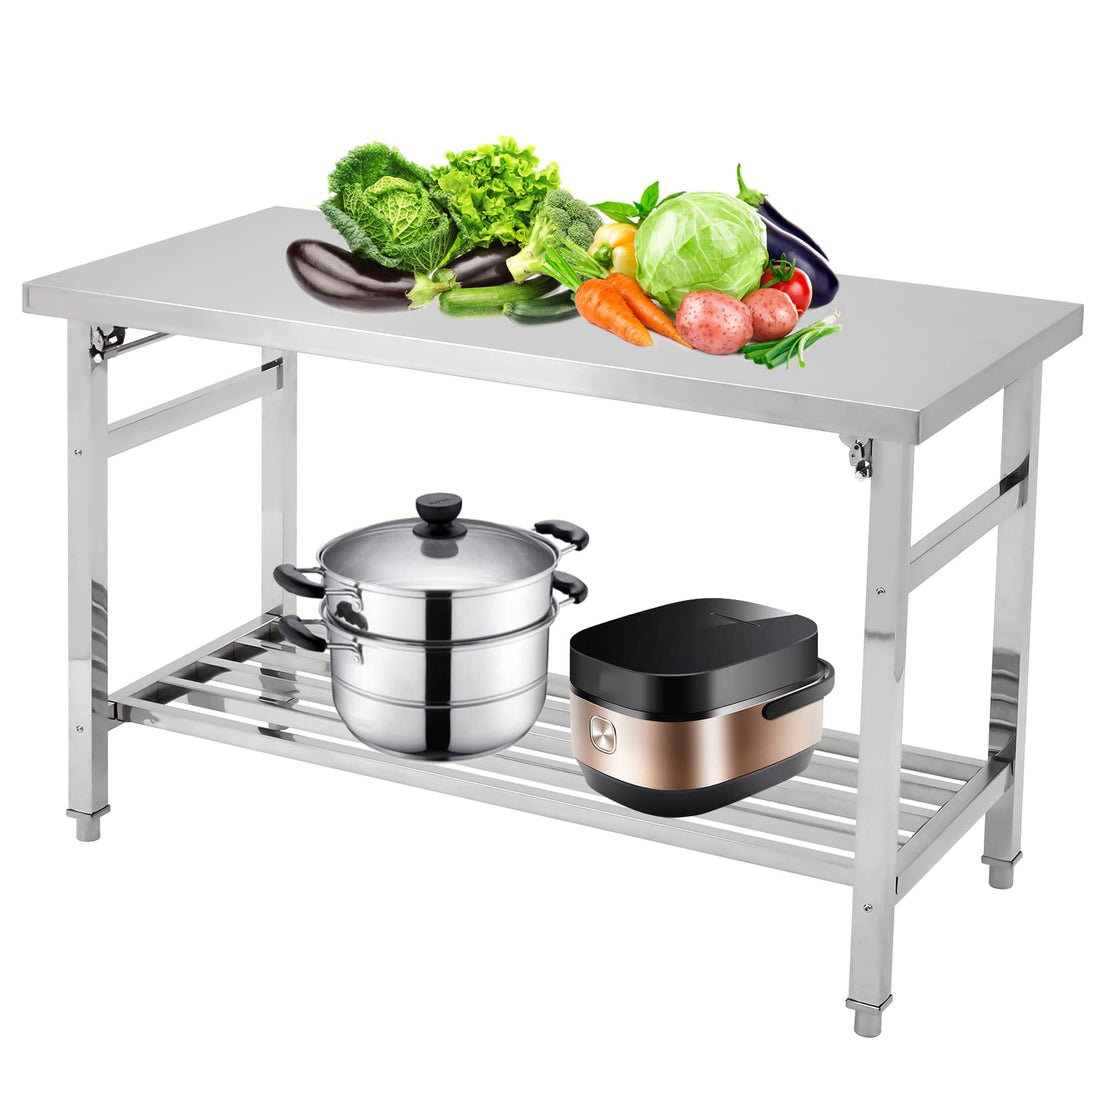 GARVEE 48x24 Inch Stainless Steel Table NSF Commercial Heavy Duty Folding Work Table with Undershelf Ideal for Kitchen Laundry and Outdoor Cooking